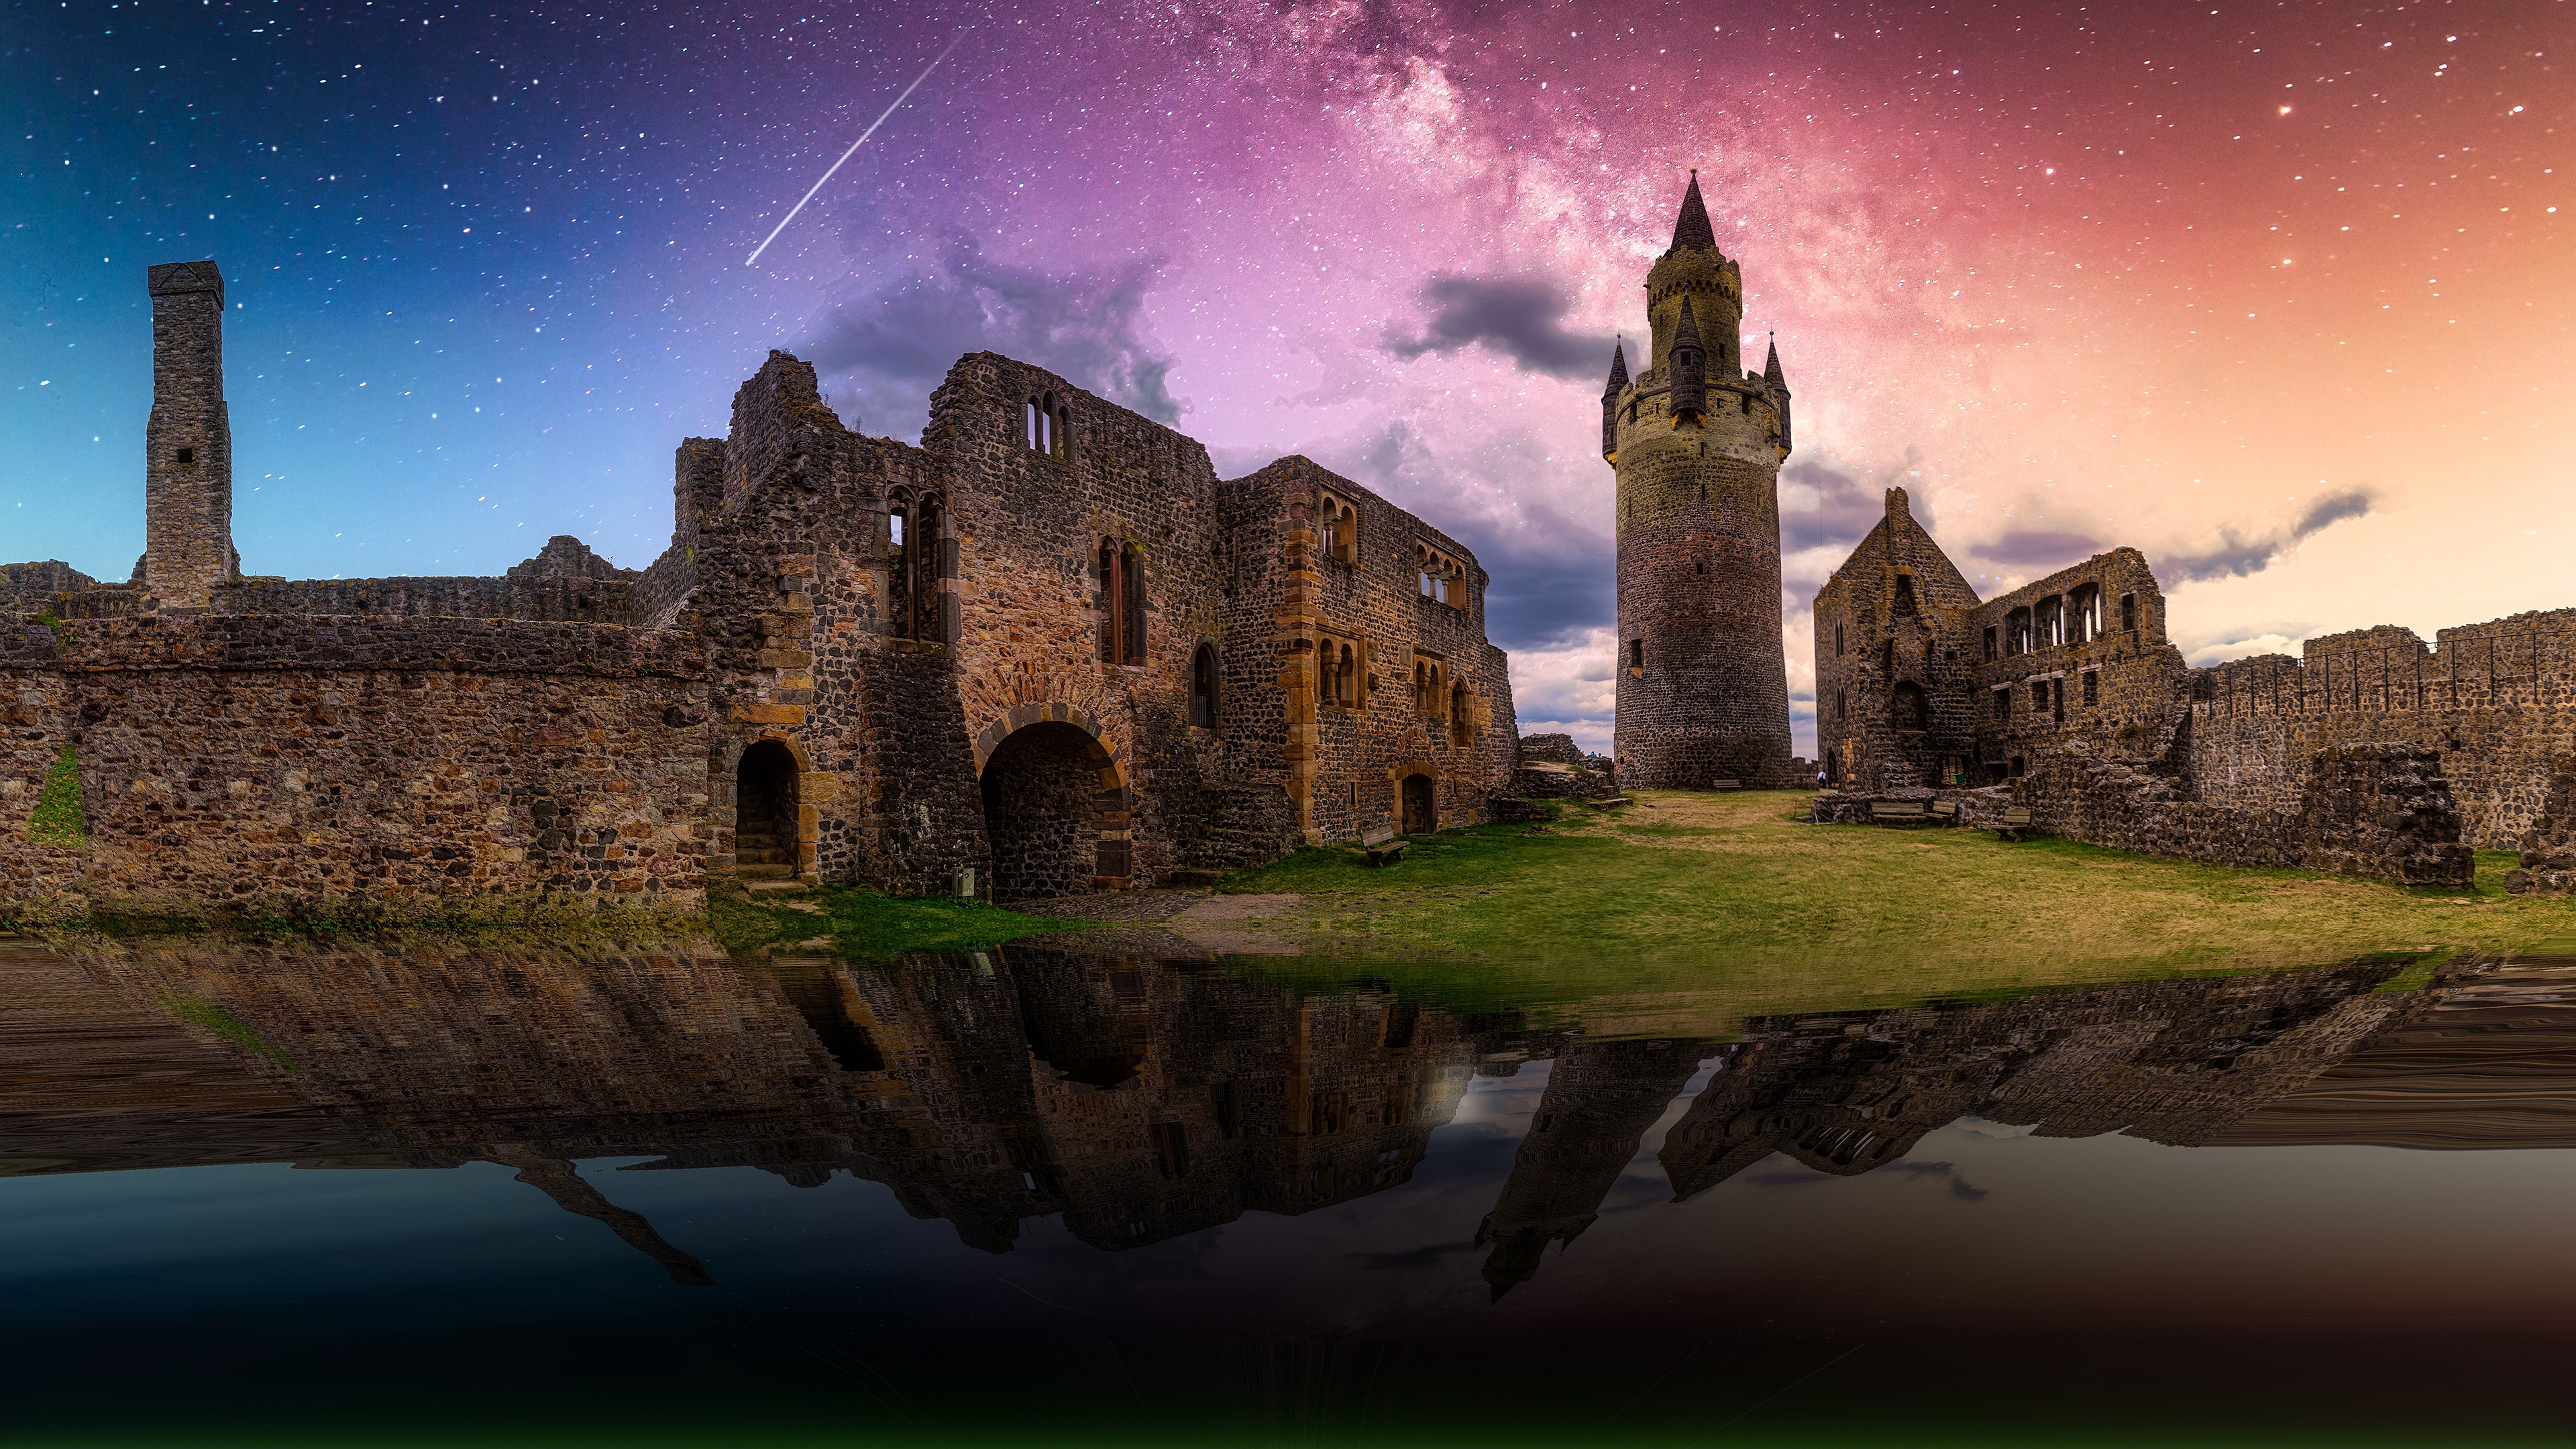 man made, ruin, architecture, castle, cloud, fortress, night, reflection, starry sky, stars wallpaper for mobile